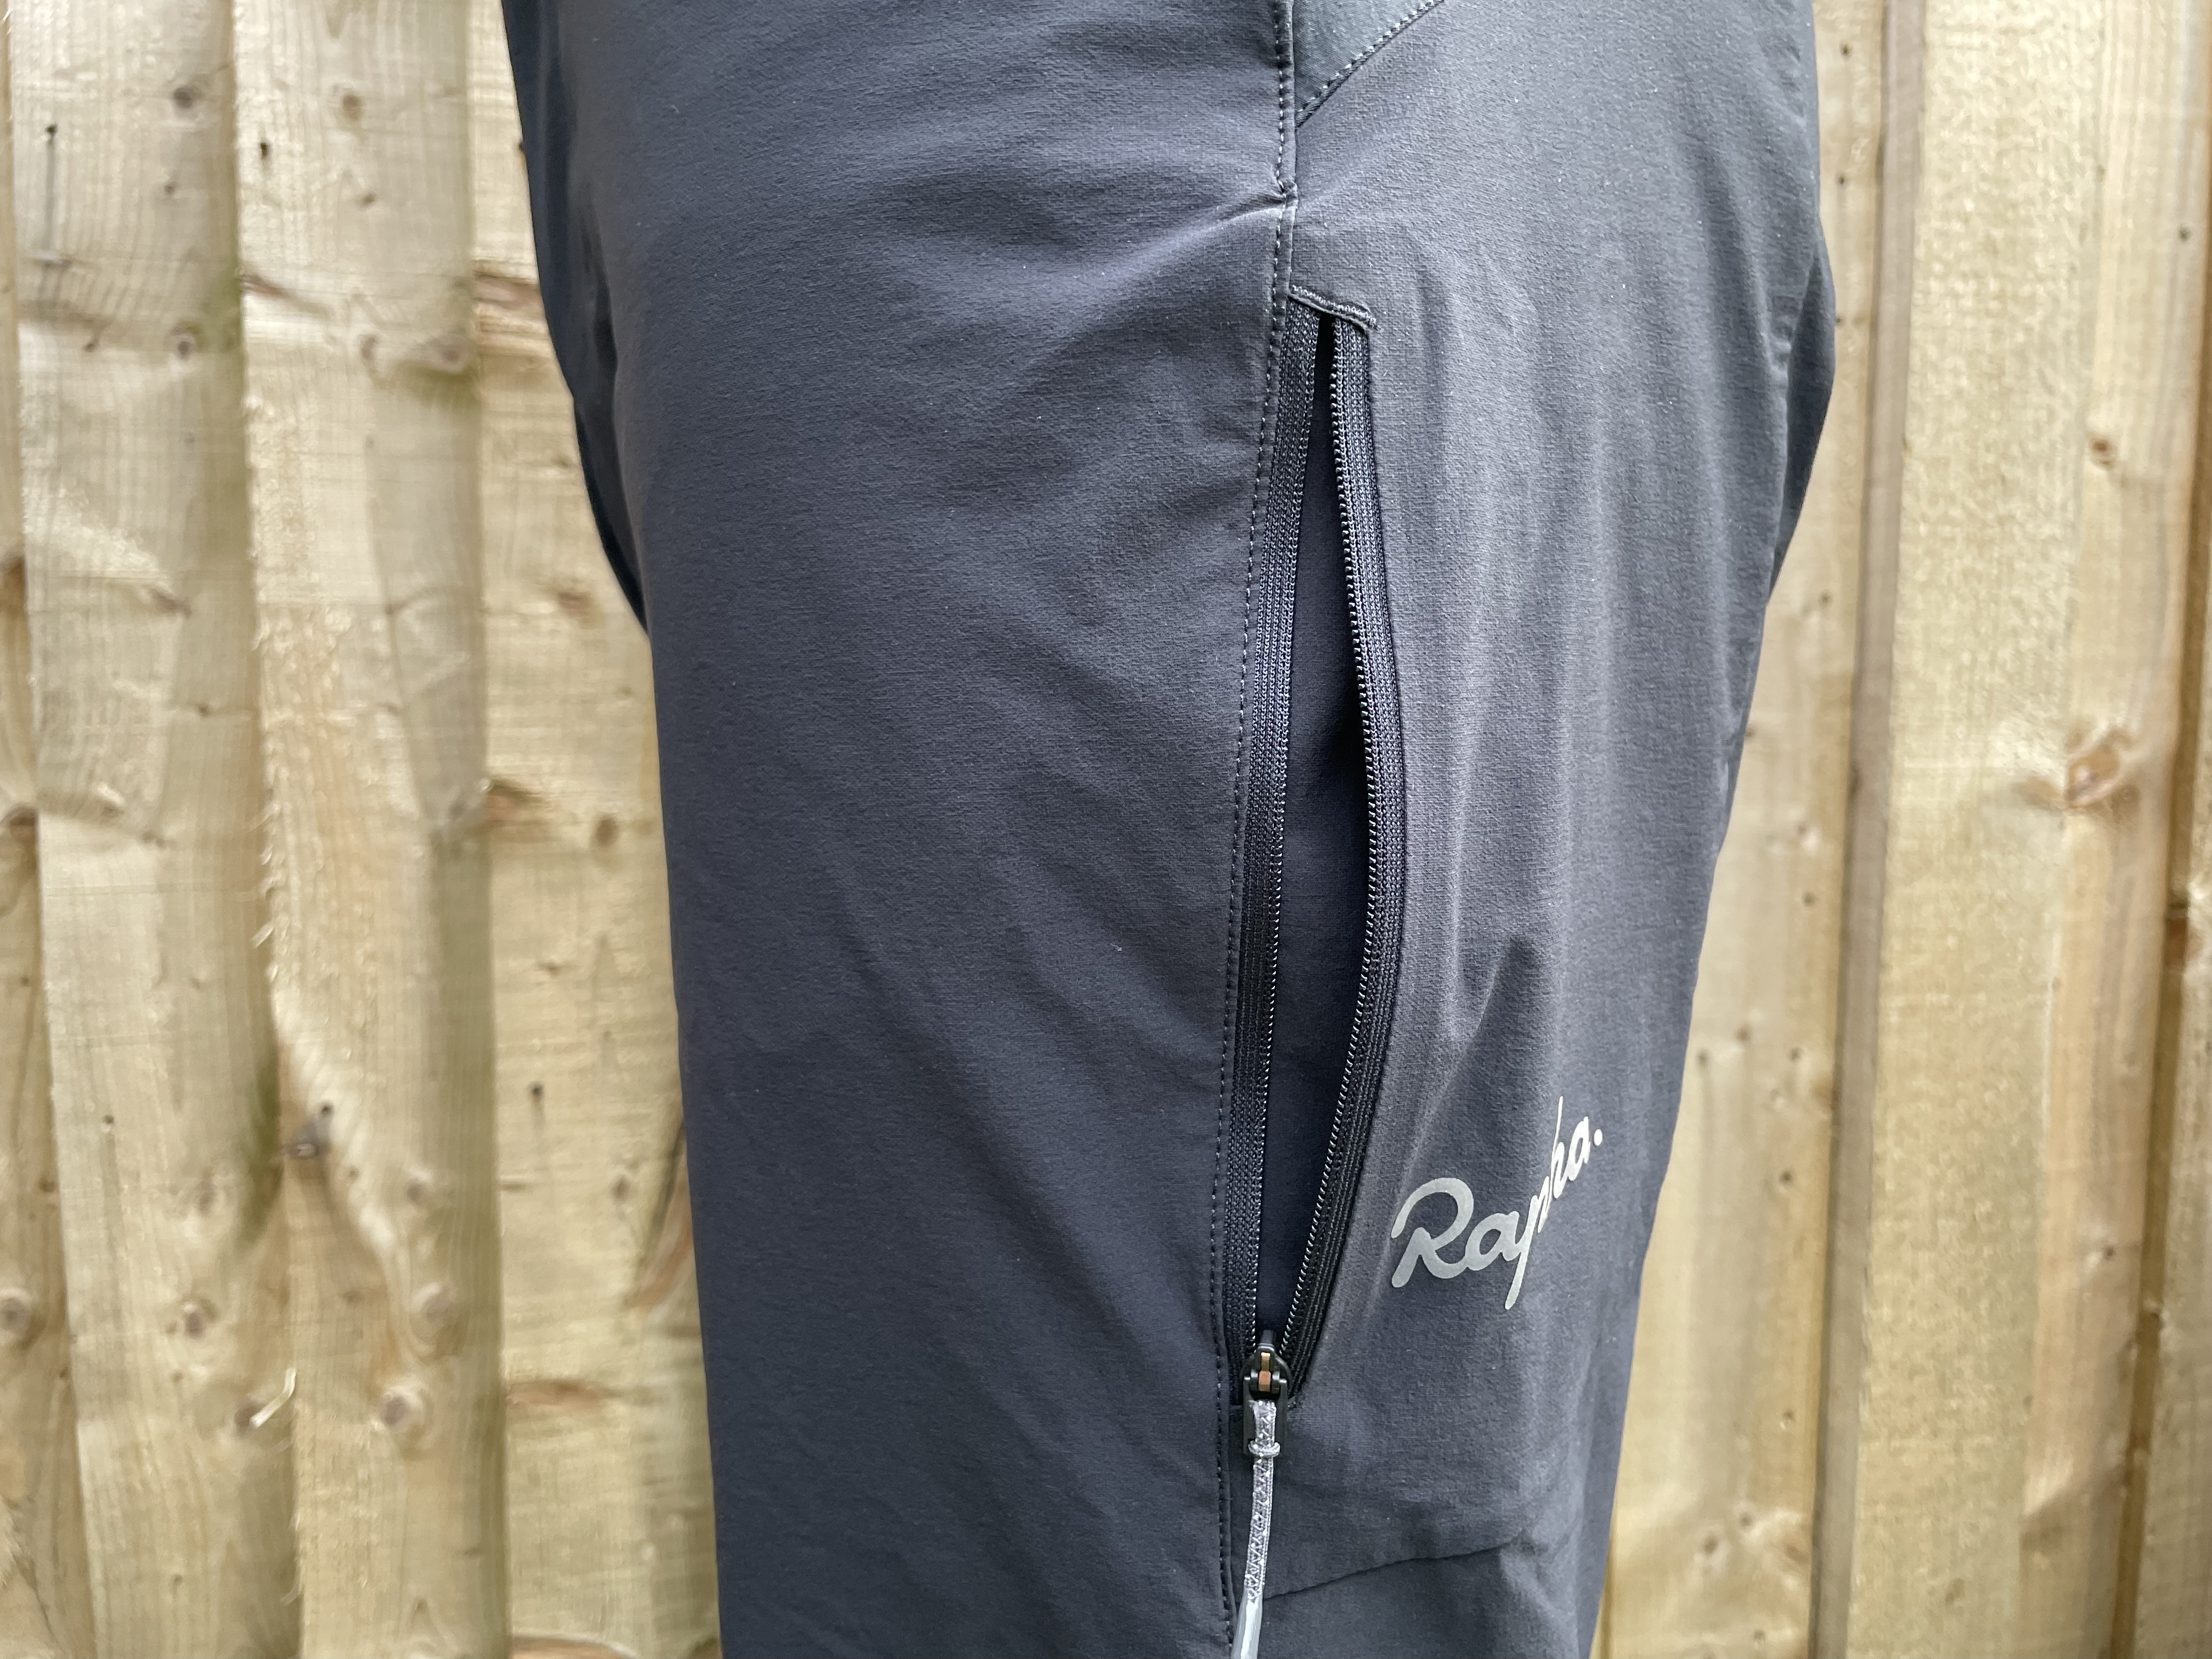 Zipped thigh pockets of the Rapha Explore Pants